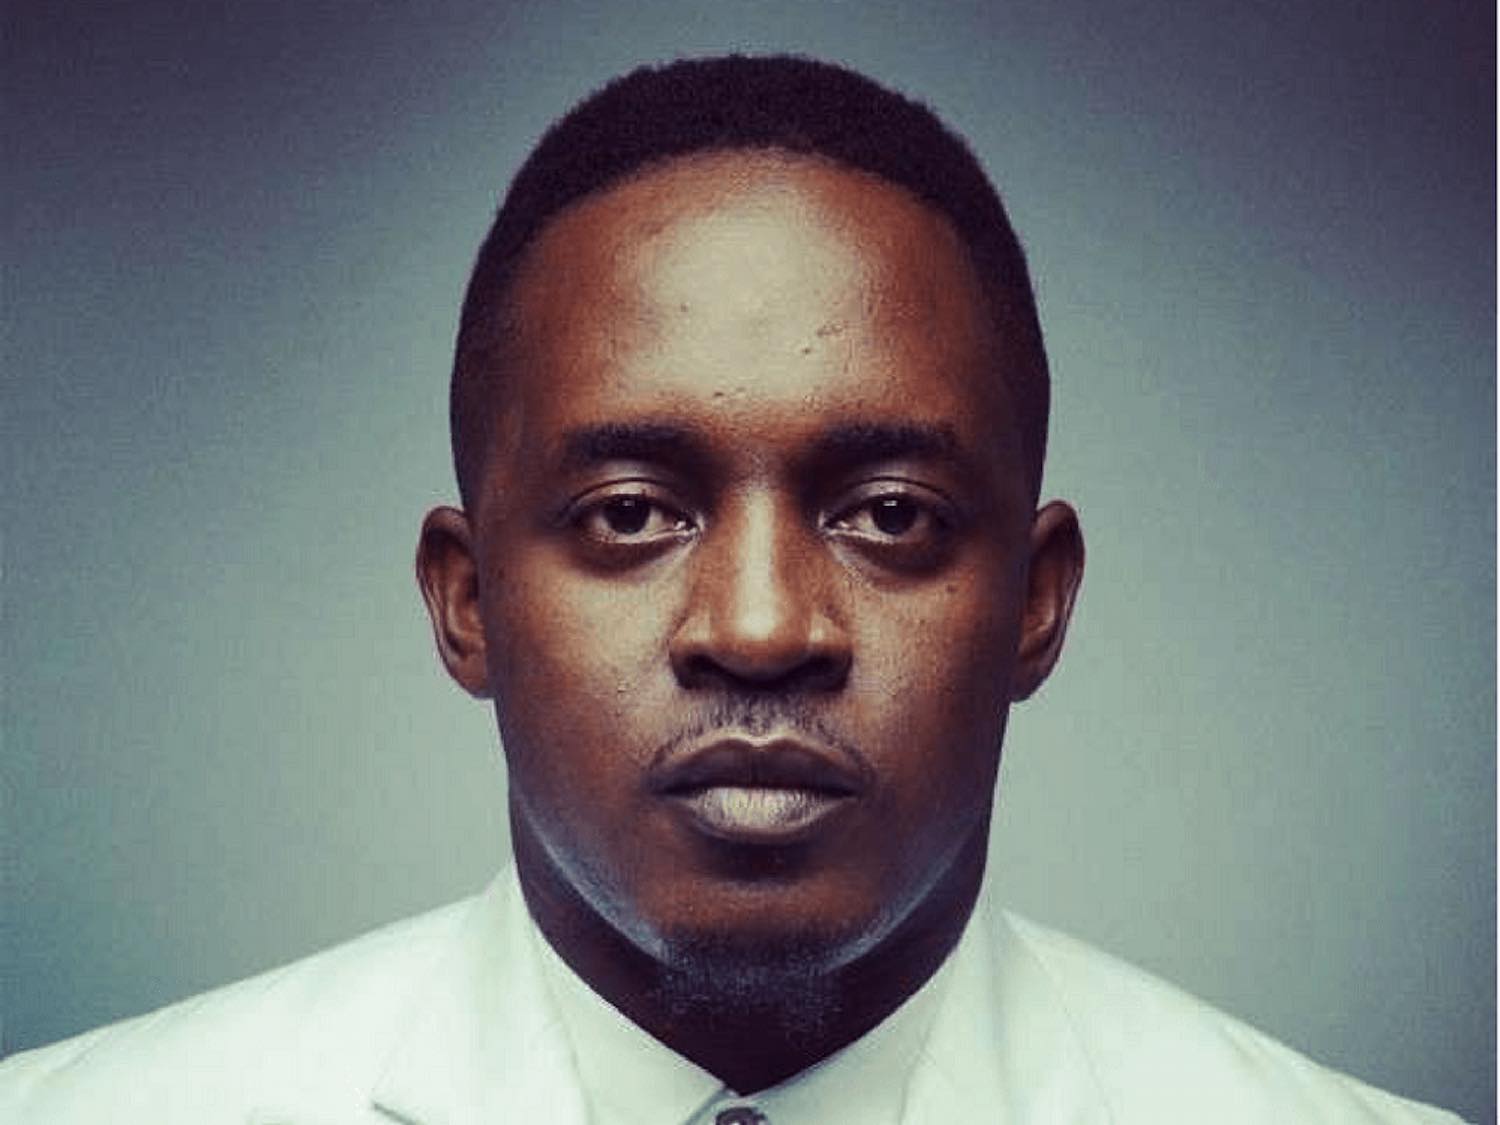 M.I. Abaga and A-Q release a surprise EP The Live Report